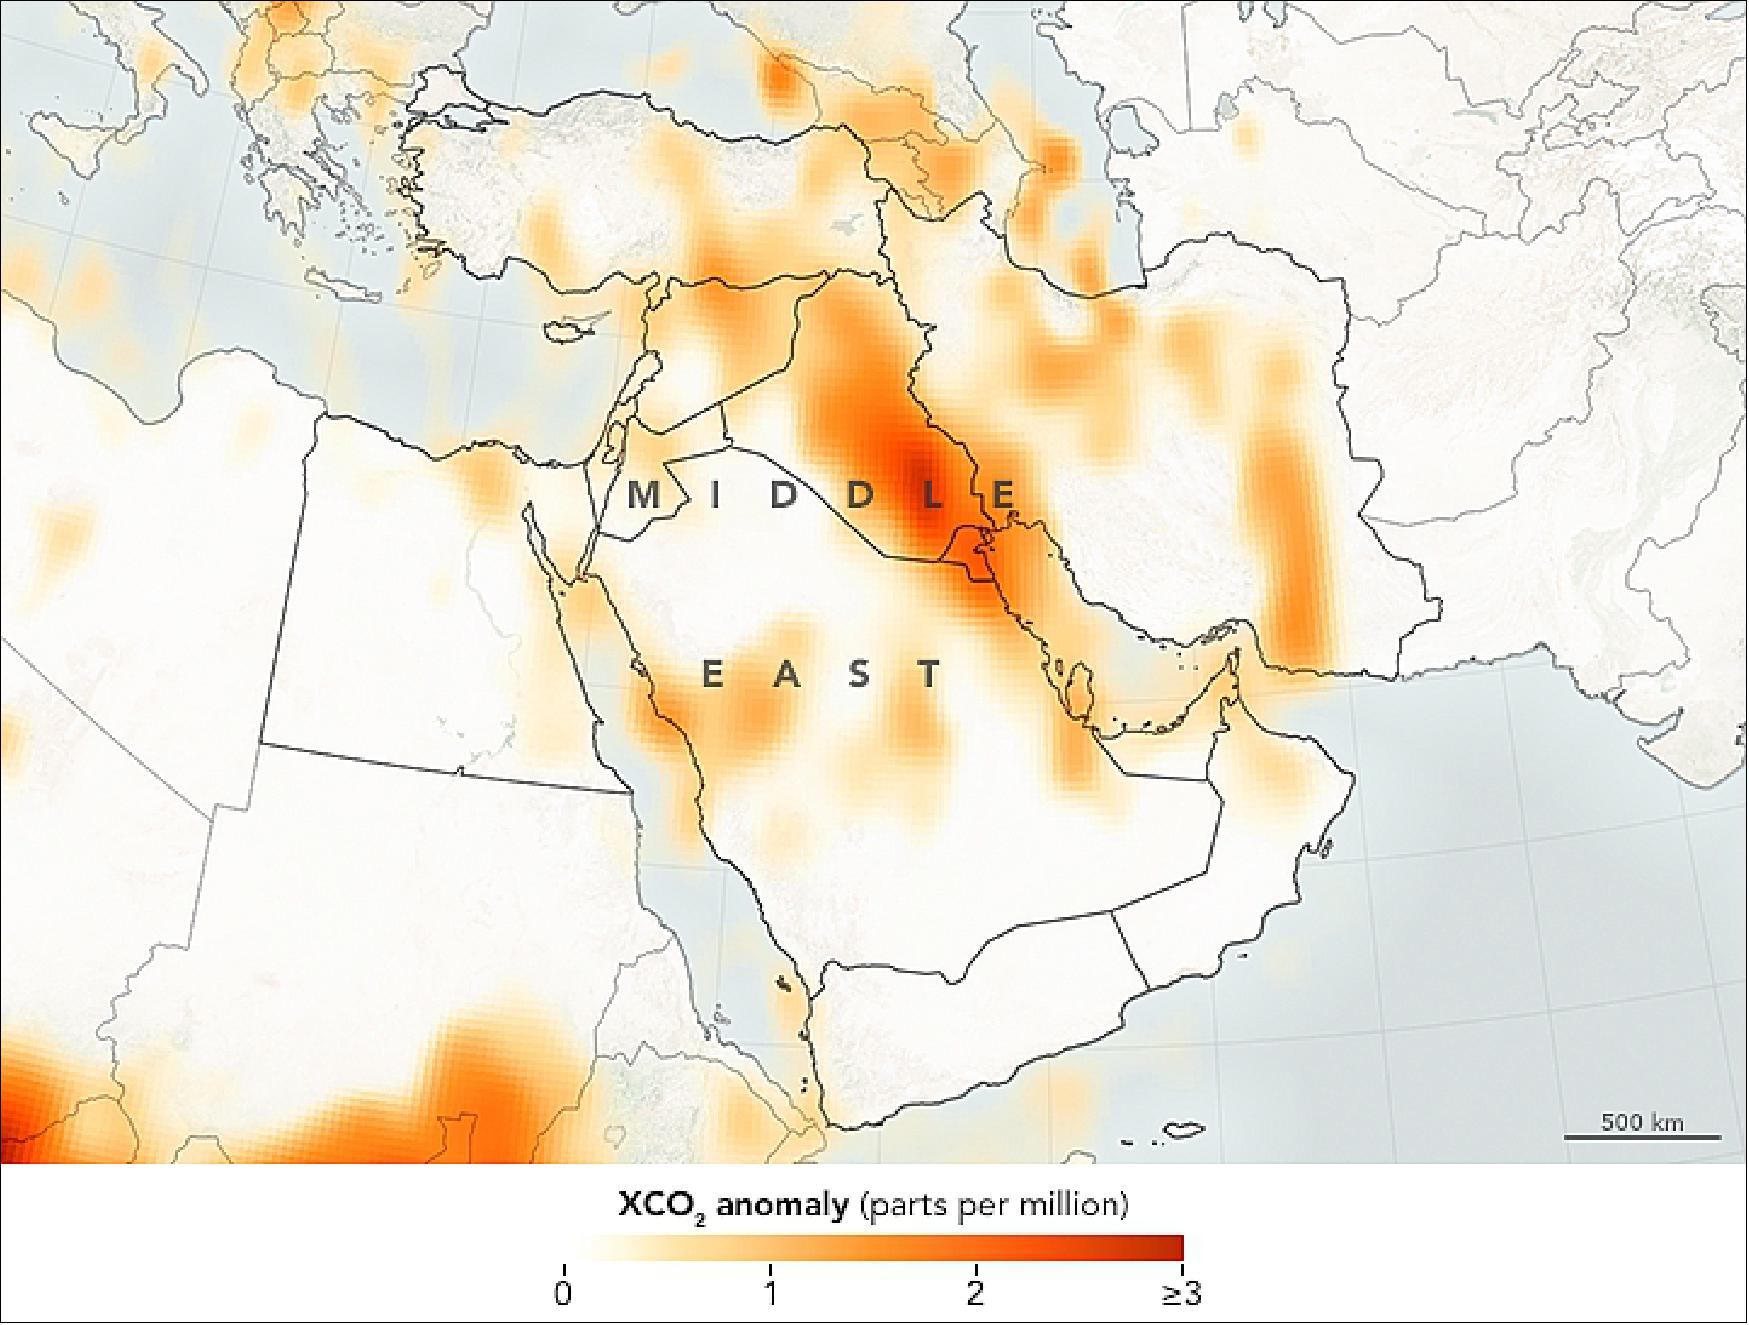 Figure 24: Illustration of OCO-2 CO2 concentrations in the Middle East measured in the period 2014-2016 (image credit: NASA Earth Observatory, maps by Joshua Stevens, using OCO-2 anomaly data of Ref. 44)